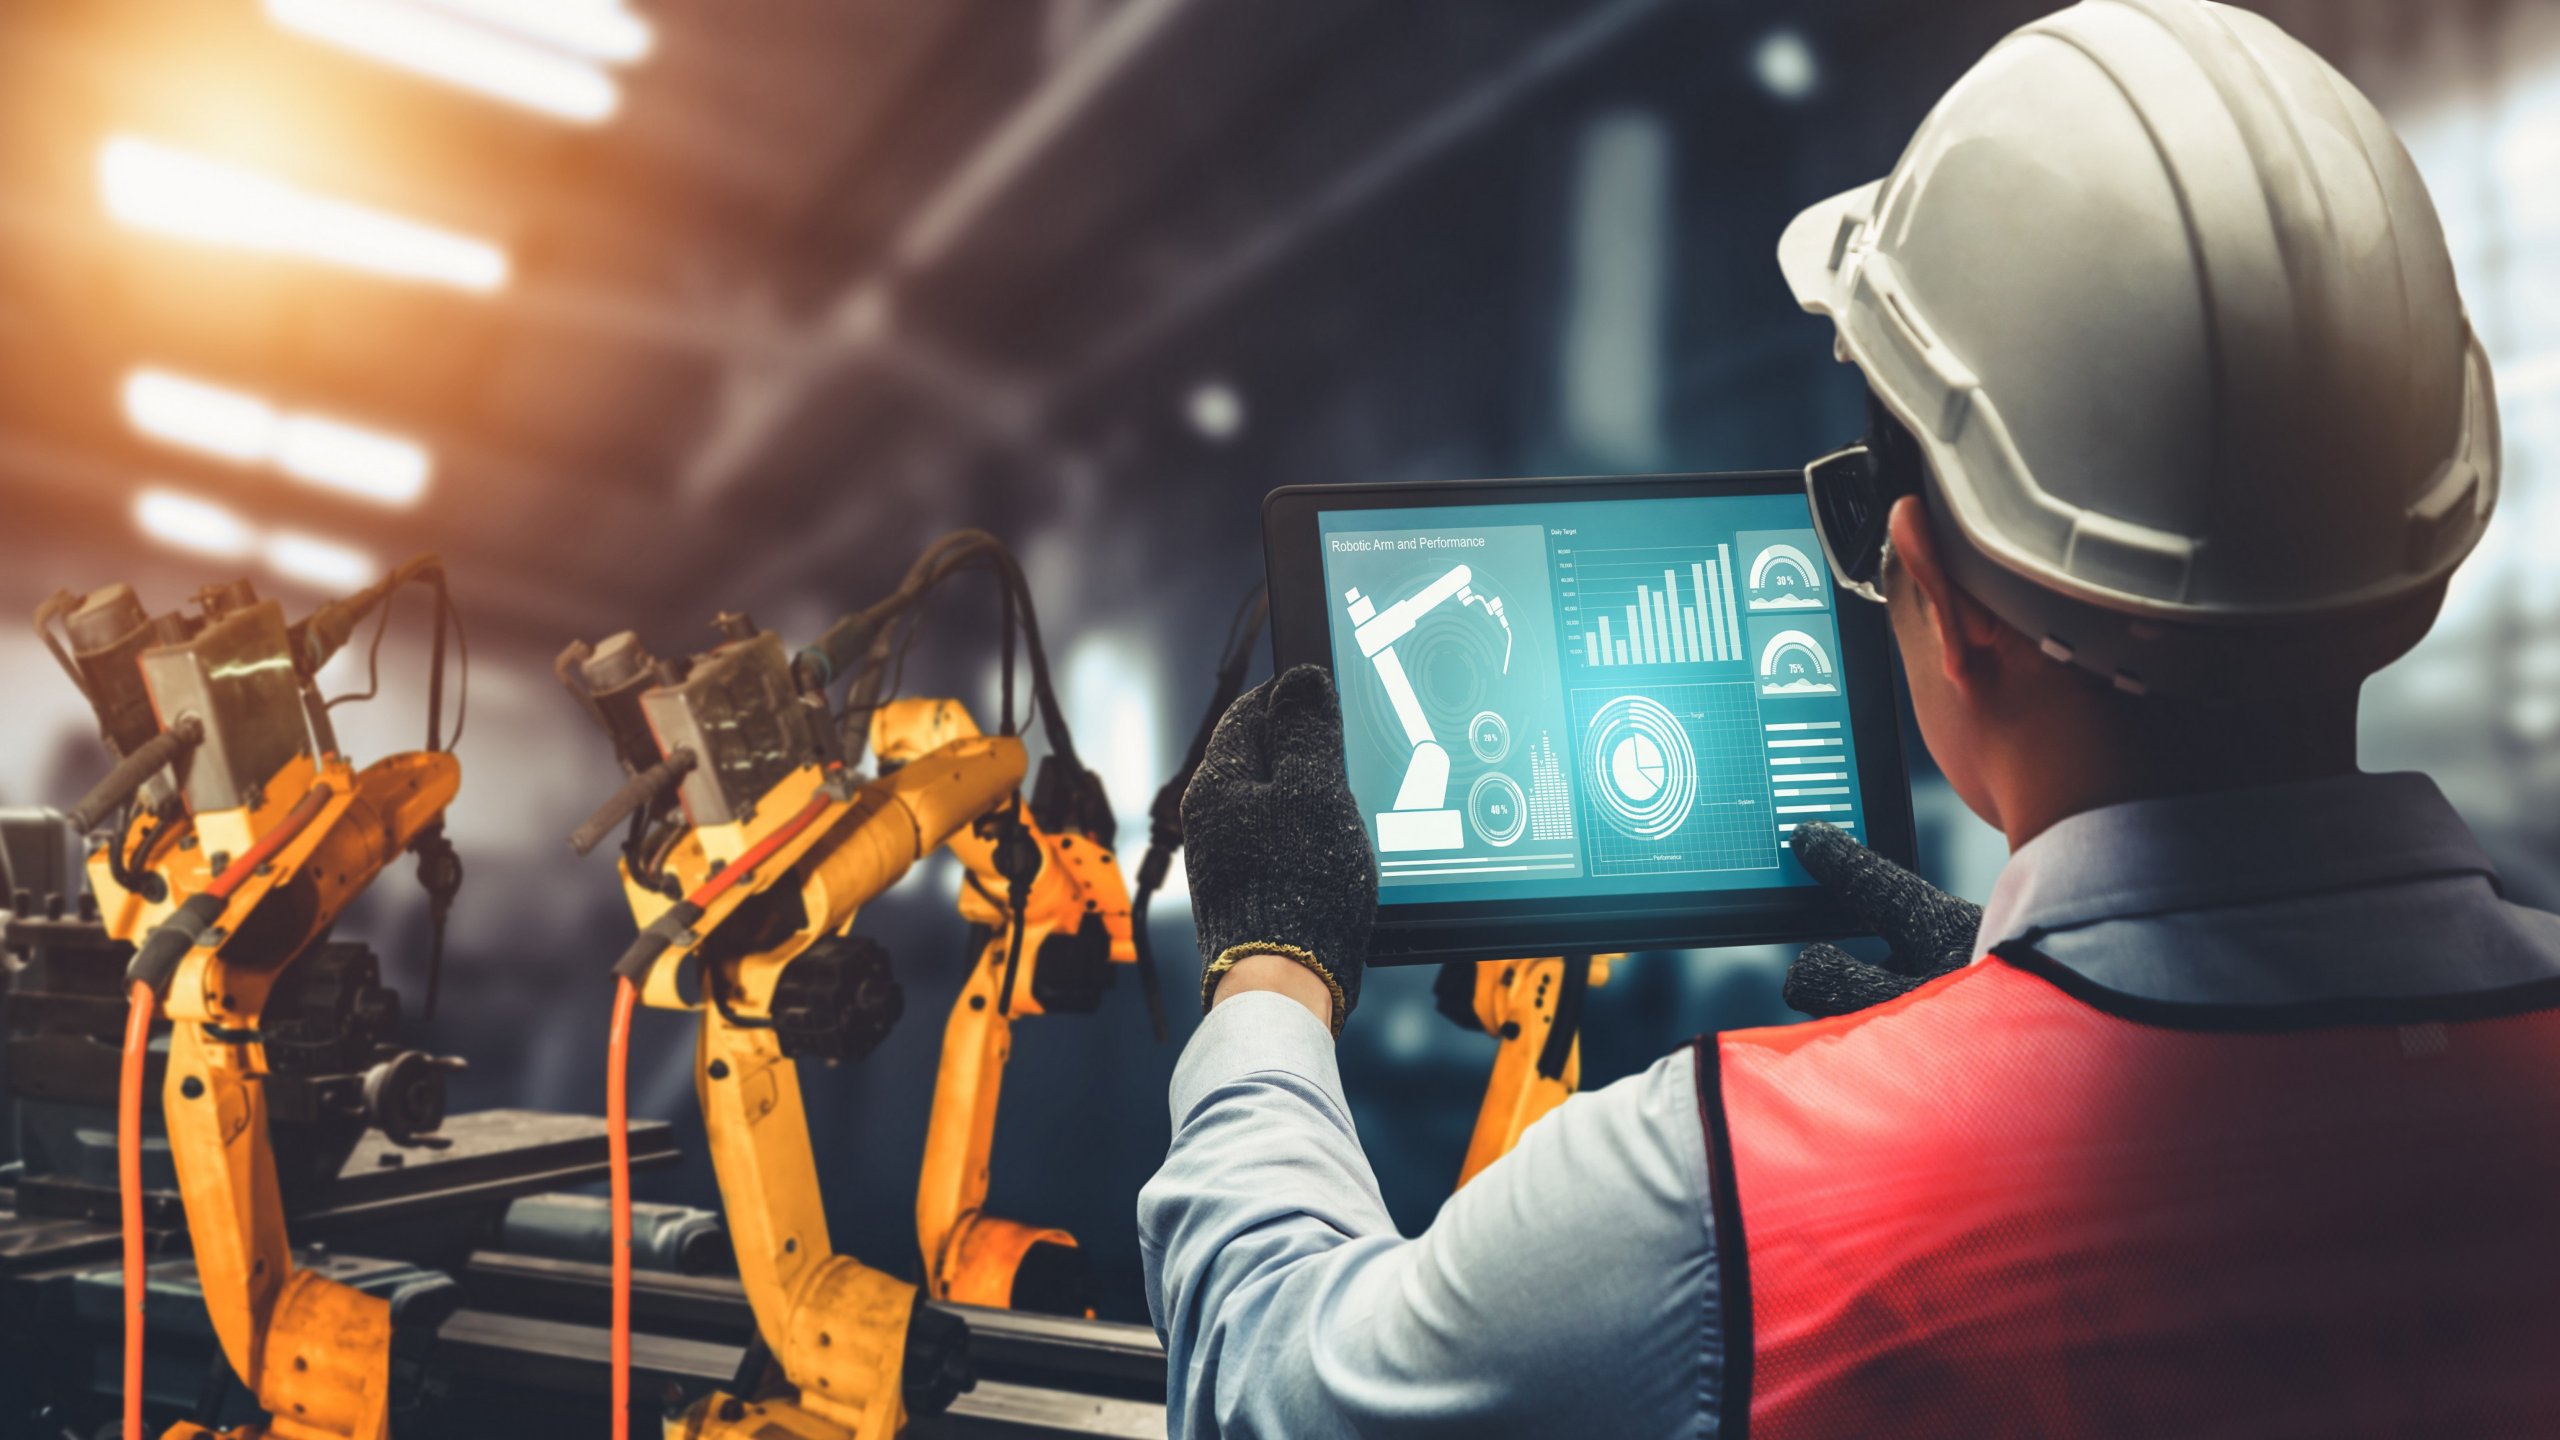 Employee wearing PPE looking at charts on a tablet in a factory with robotic equipment